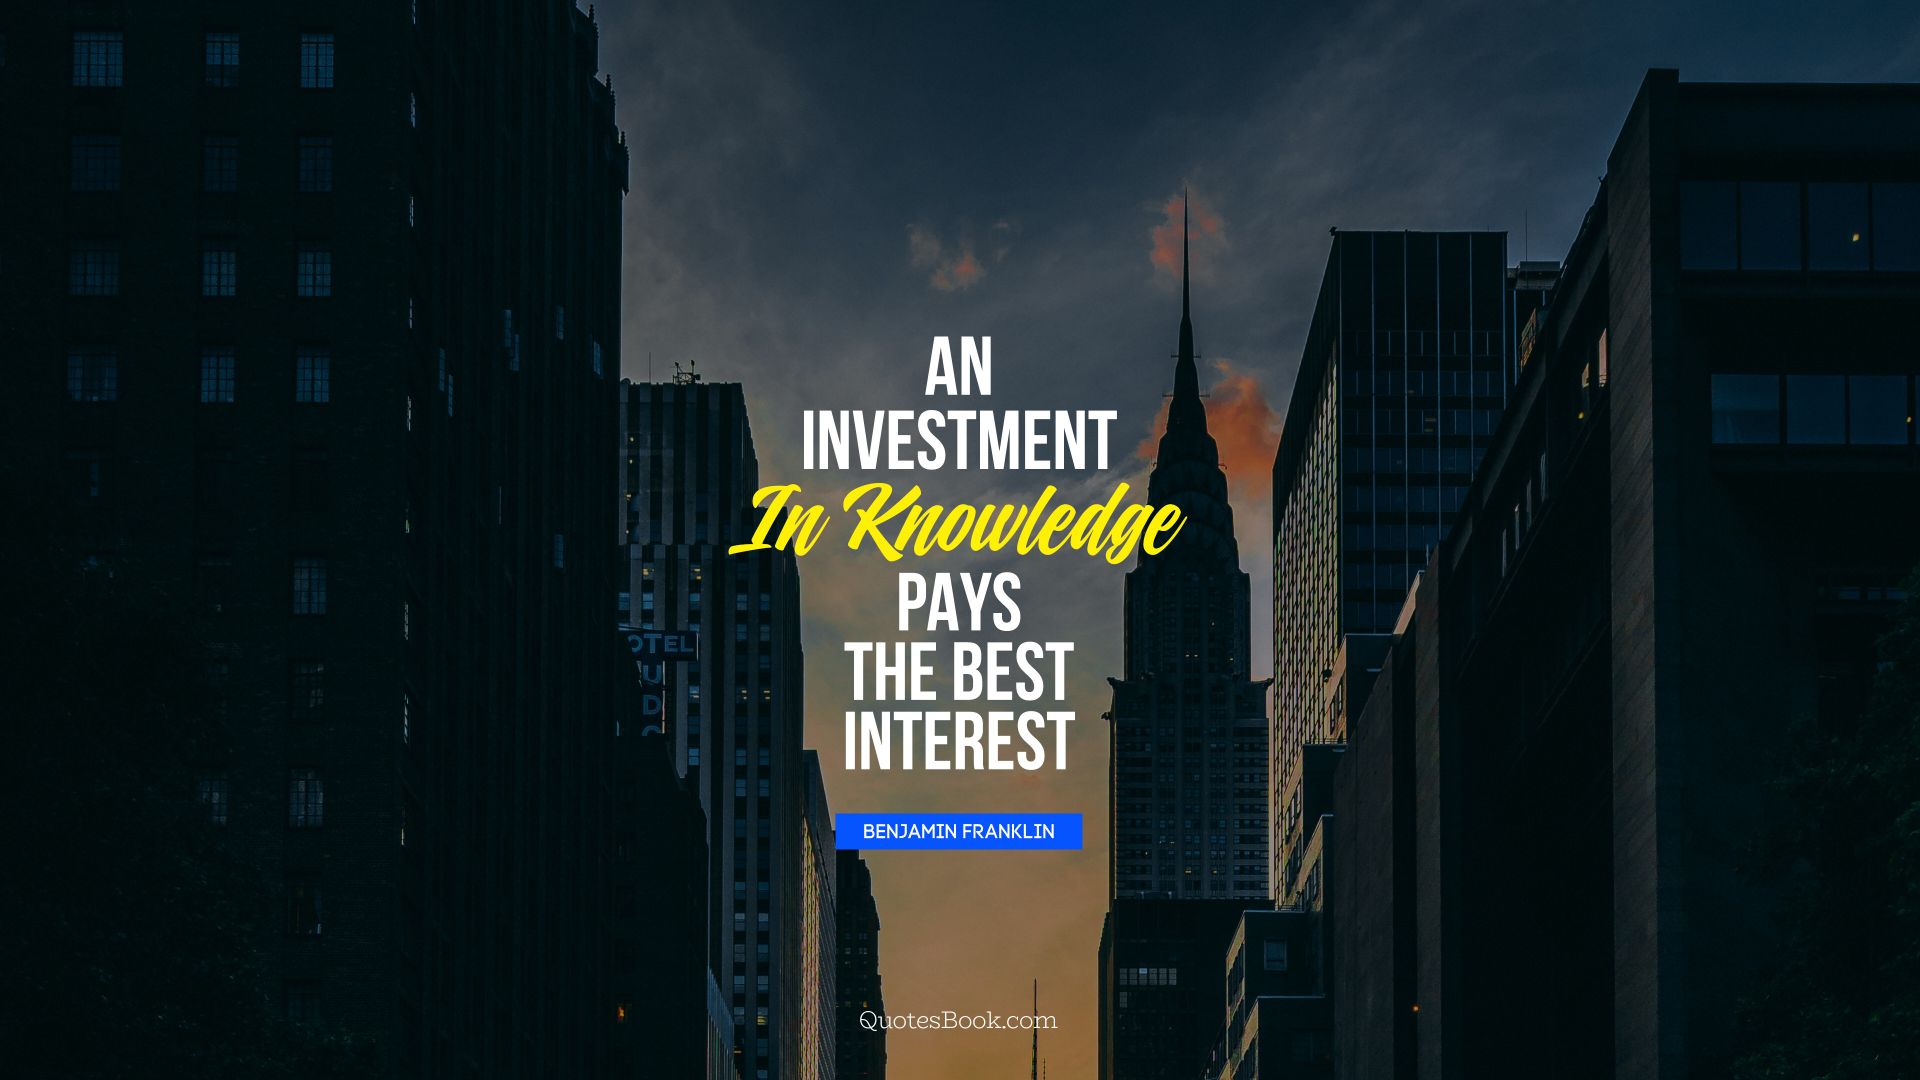 An investment in knowledge pays 
the best interest. - Quote by Benjamin Franklin